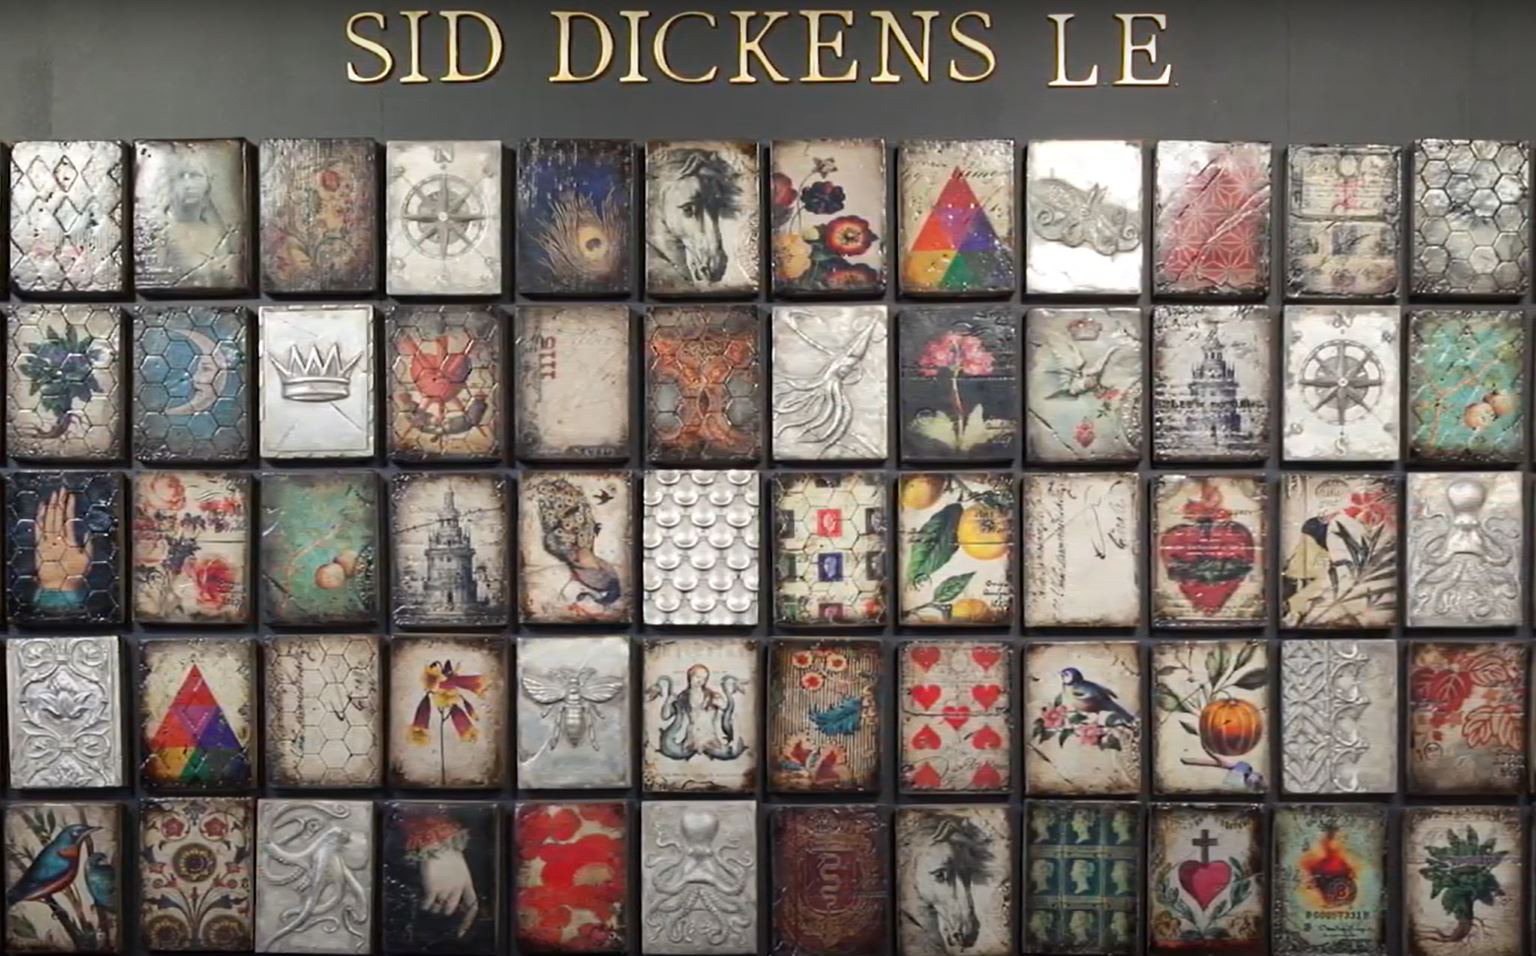 Most Expensive Sid Dickens Tiles